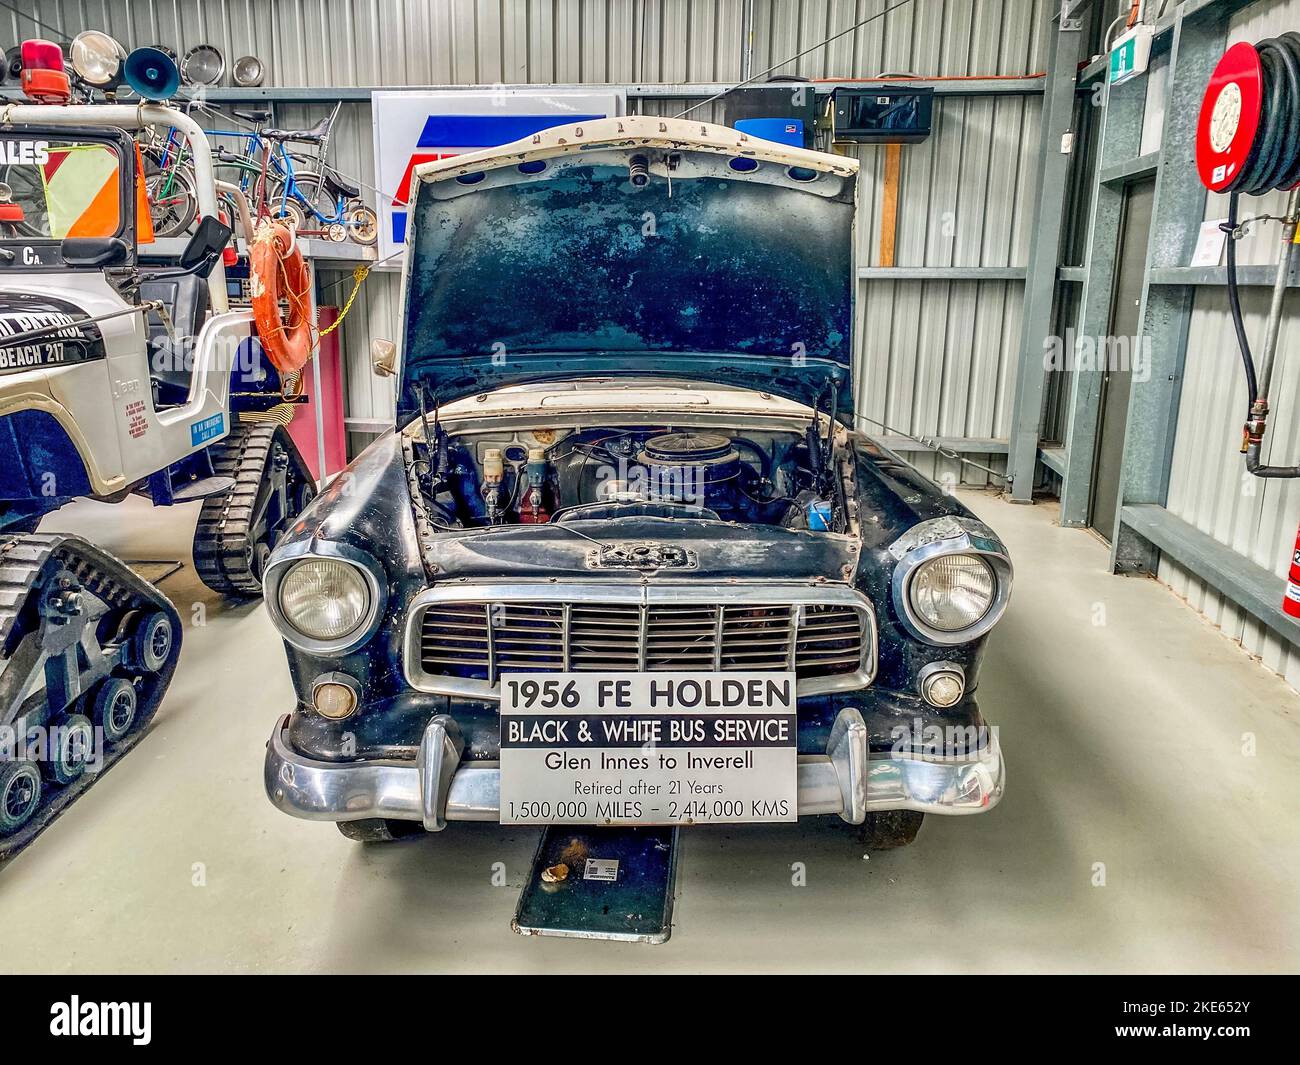 The 1956 FE Holden car on display at the National Transport Museum, New South Wales, Australia. Stock Photo